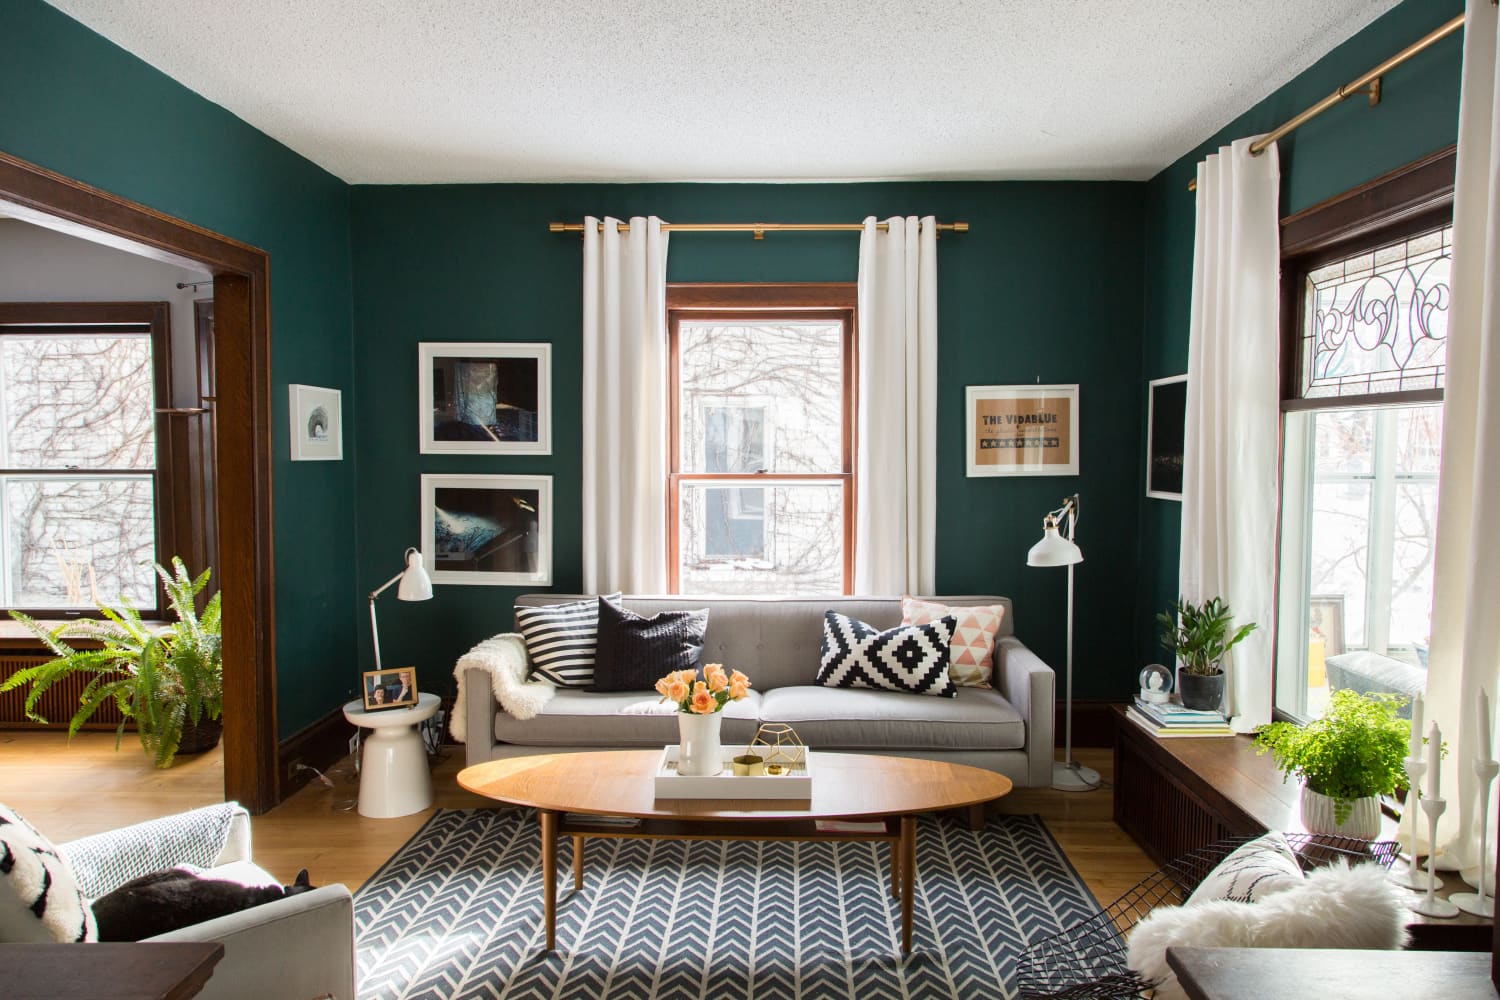 The 20 Best Green Living Room Ideas We’ve Ever Seen - Stylish Green